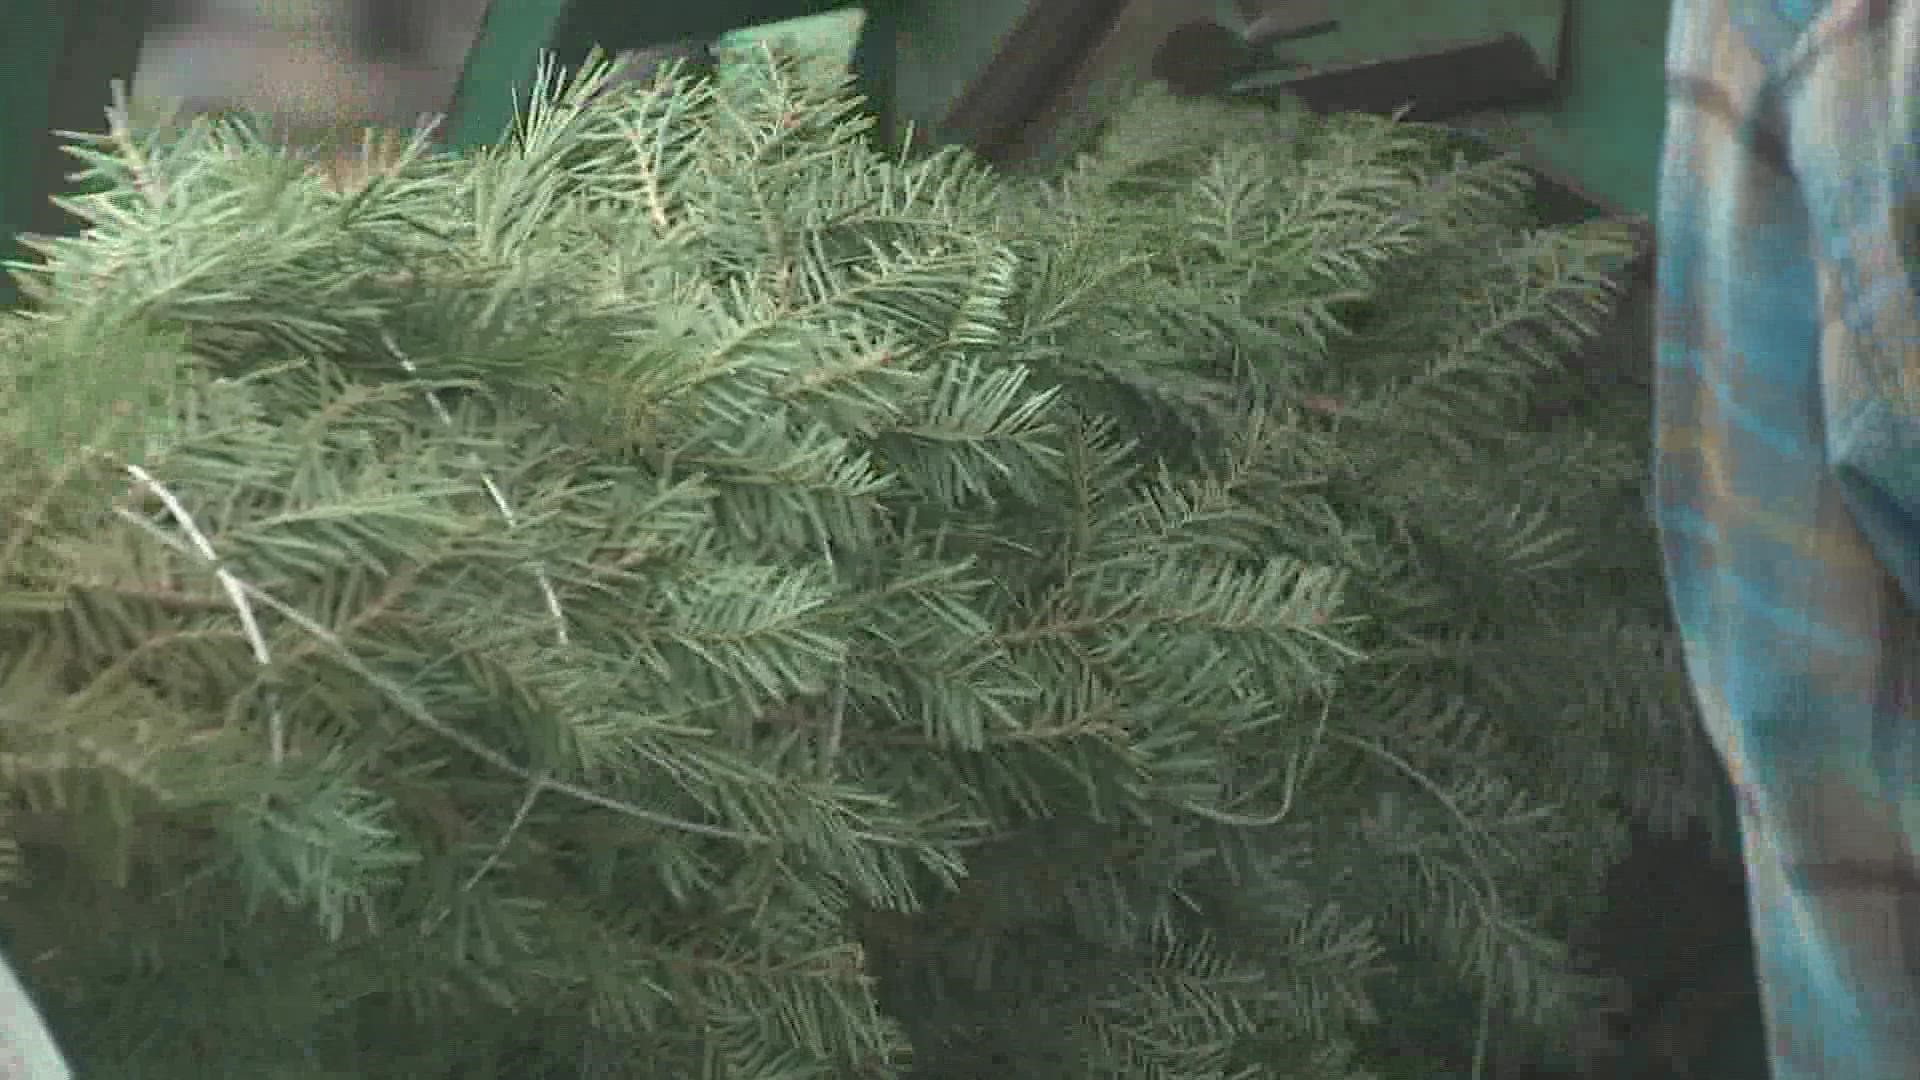 Growers from across the state donated Christmas trees, which were inspected by the ODA.